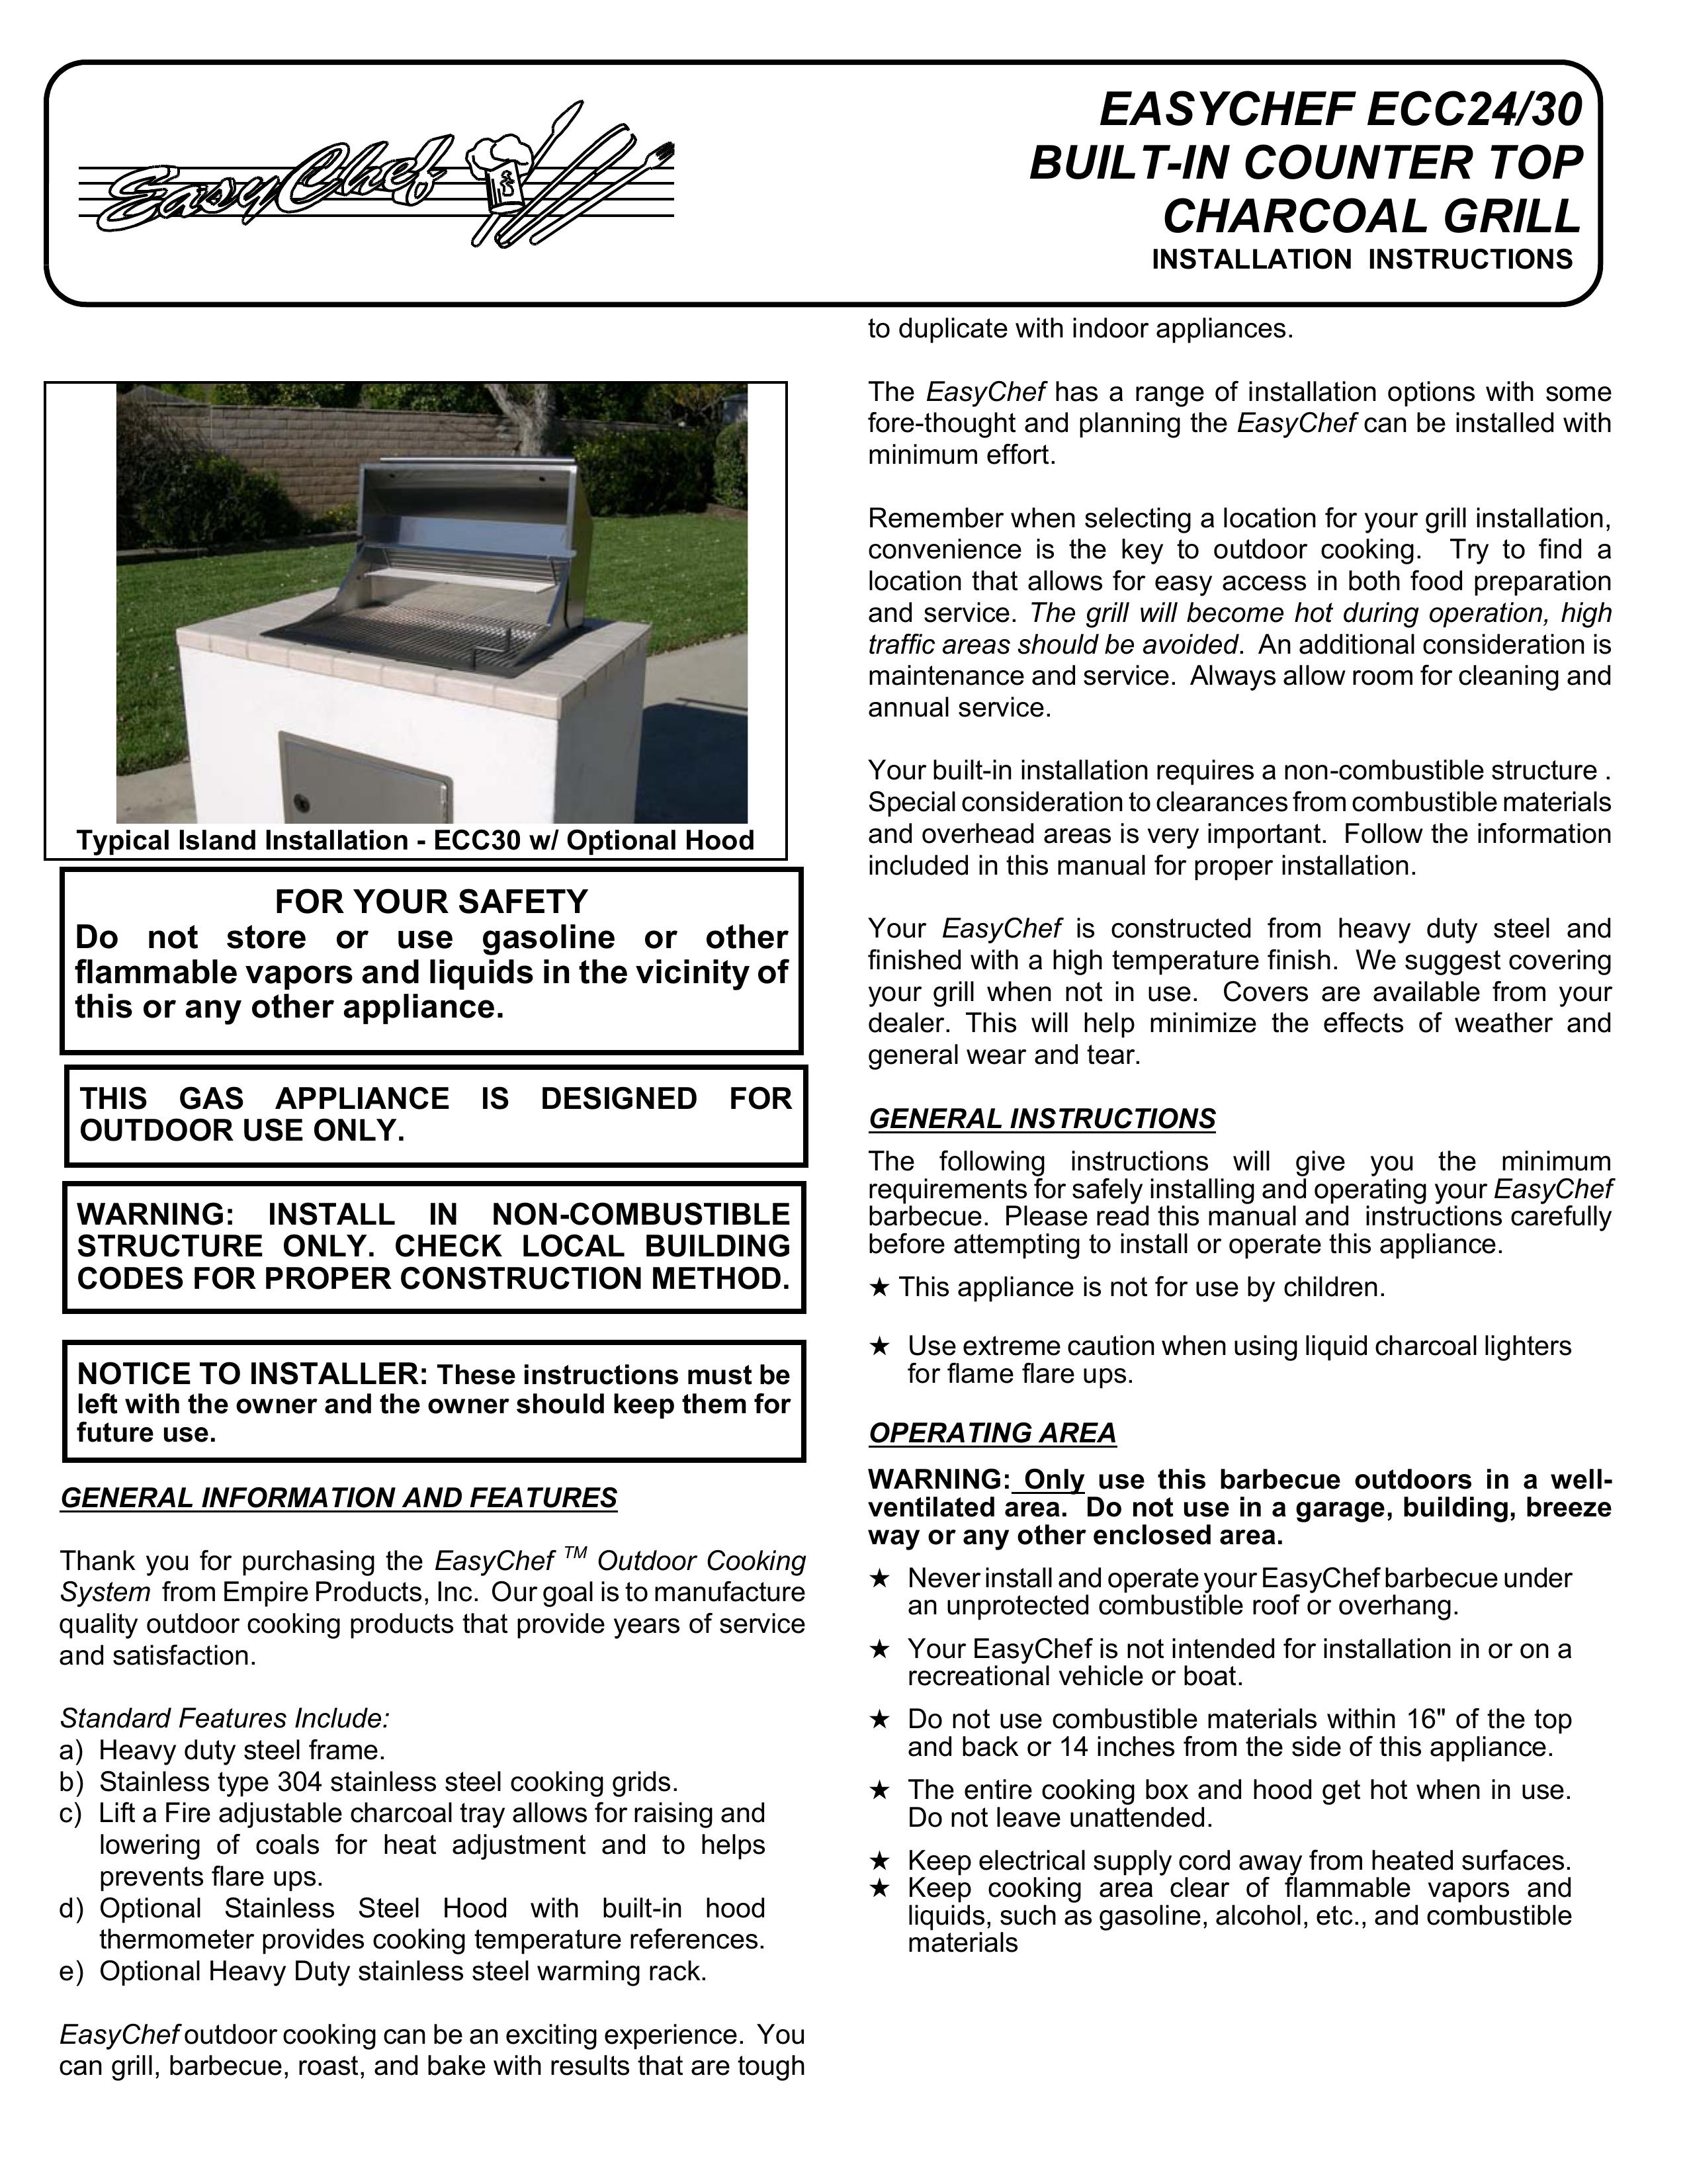 Empire Products ECC24 Charcoal Grill User Manual